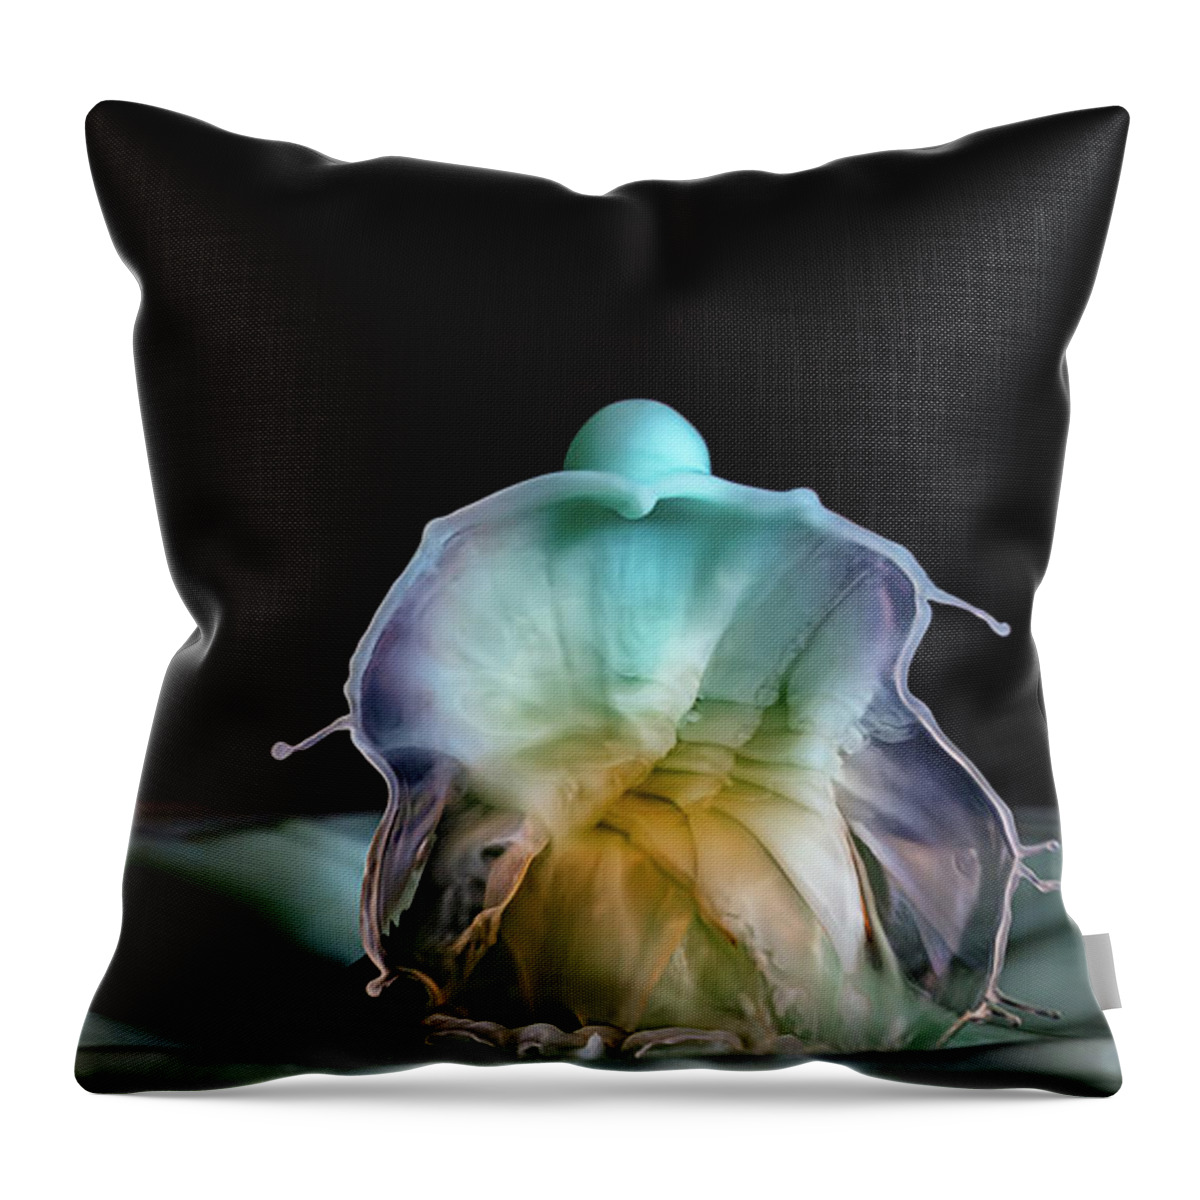 Art Throw Pillow featuring the photograph The Throne by Michael McKenney